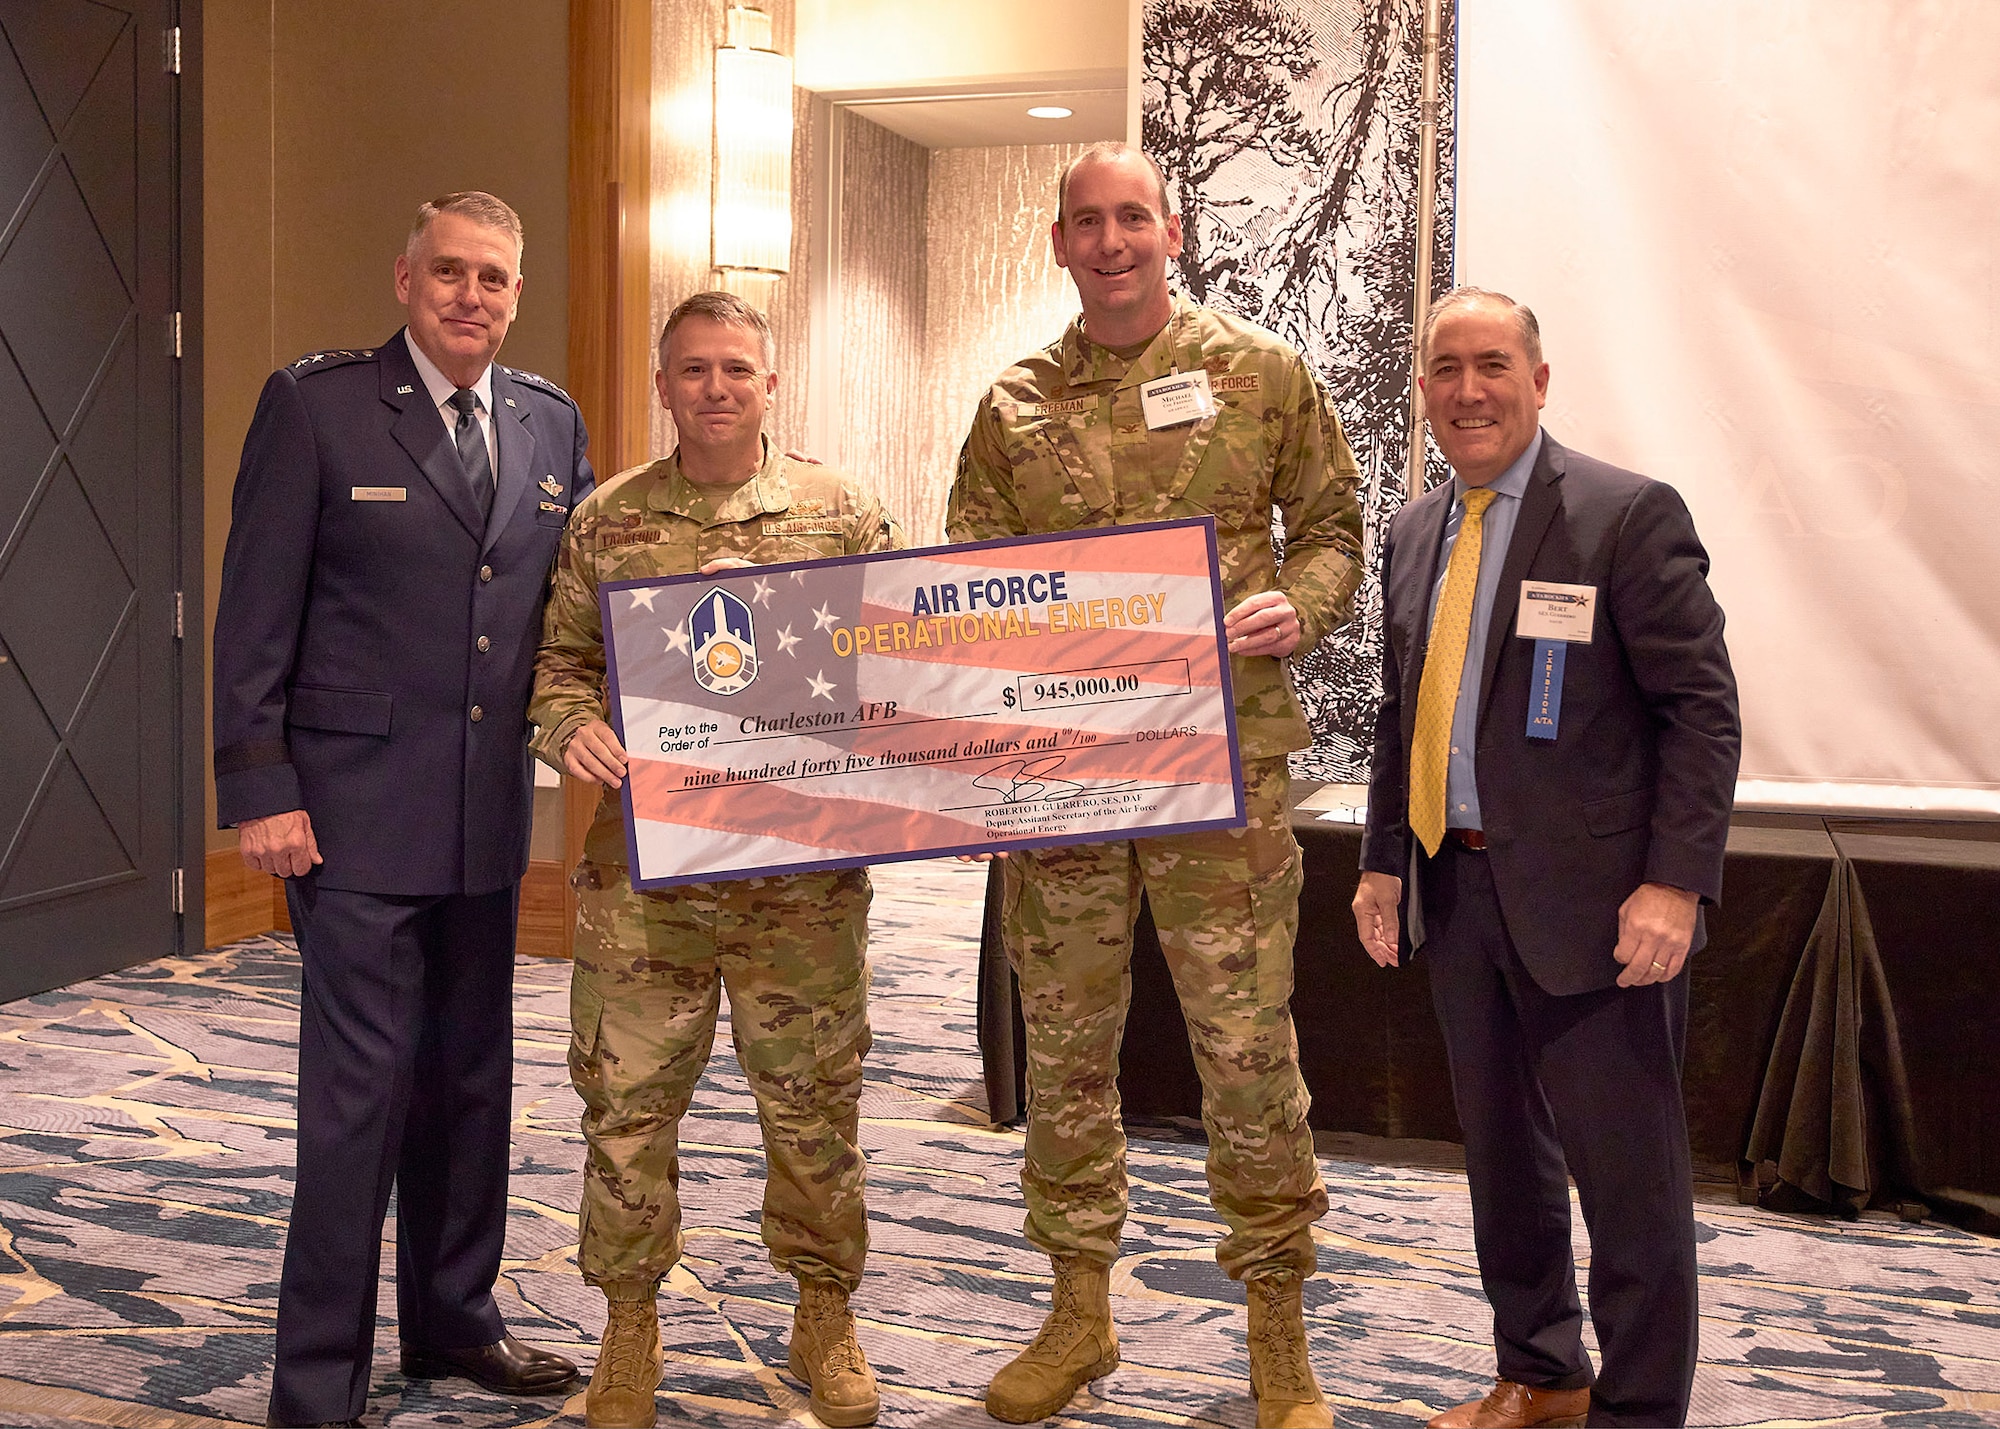 (From left) Commander of Air Mobility Command Gen. Mike Minihan, commander of the 60th Air Mobility Wing, Col. Derek M. Salmi, and Deputy Assistant Secretary of Air Force Operational Energy, Roberto Guerrero, pose for a photo after the Mission Execution Excellence Program award ceremony at the Airlift Tanker Association Symposium on October 26, 2022, in Denver, Colorado. (Airlift Tanker Association photo)